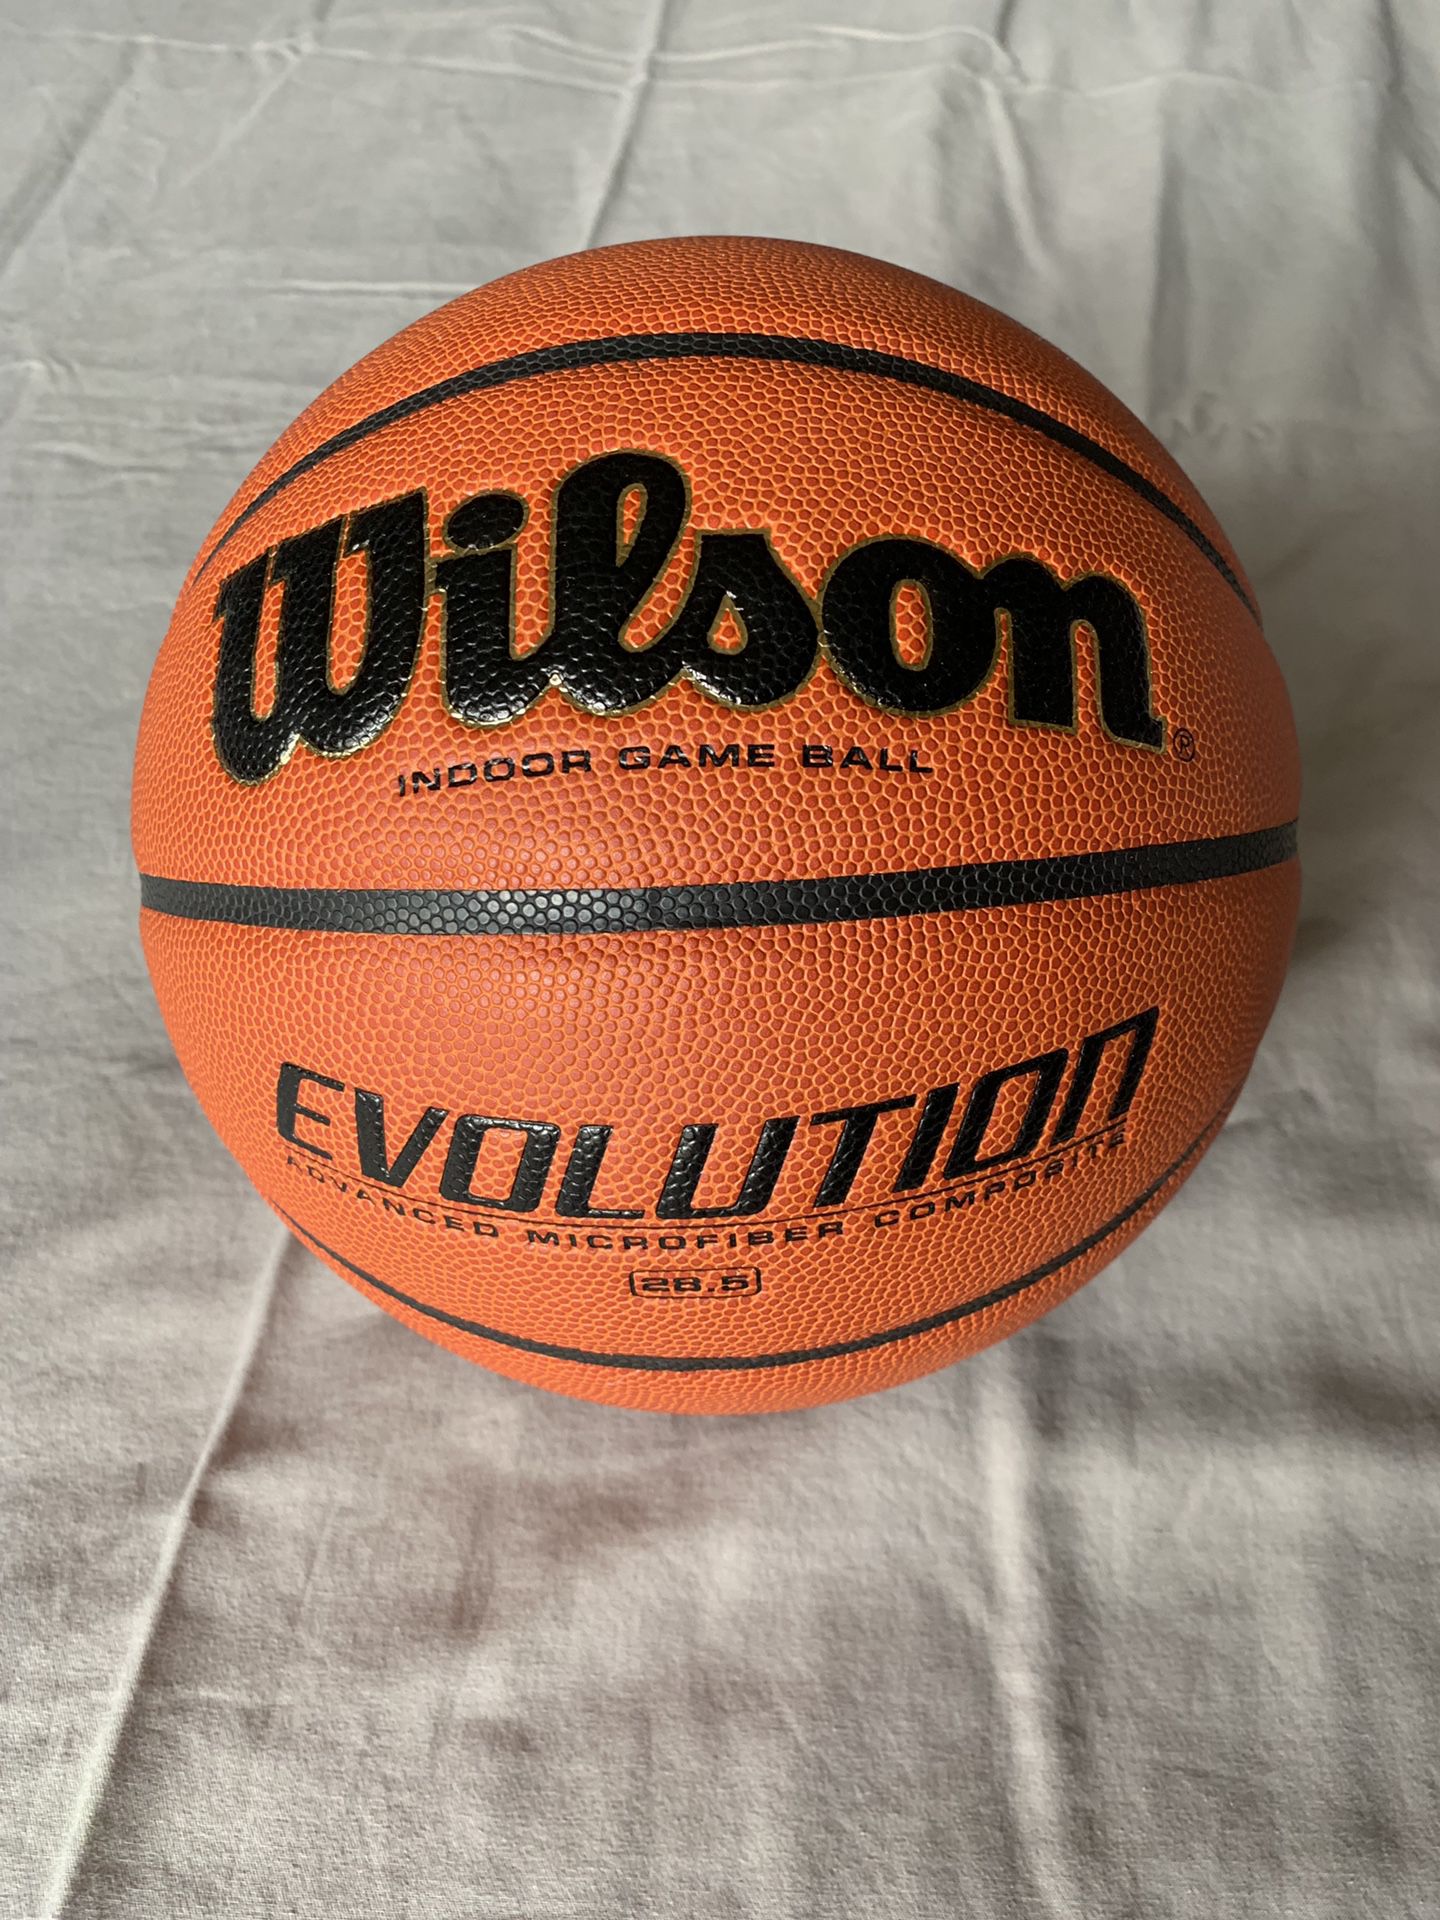 NEW INDOOR BASKETBALL 🏀-Wilson Evolution (Size 28.5 for Young Boys)